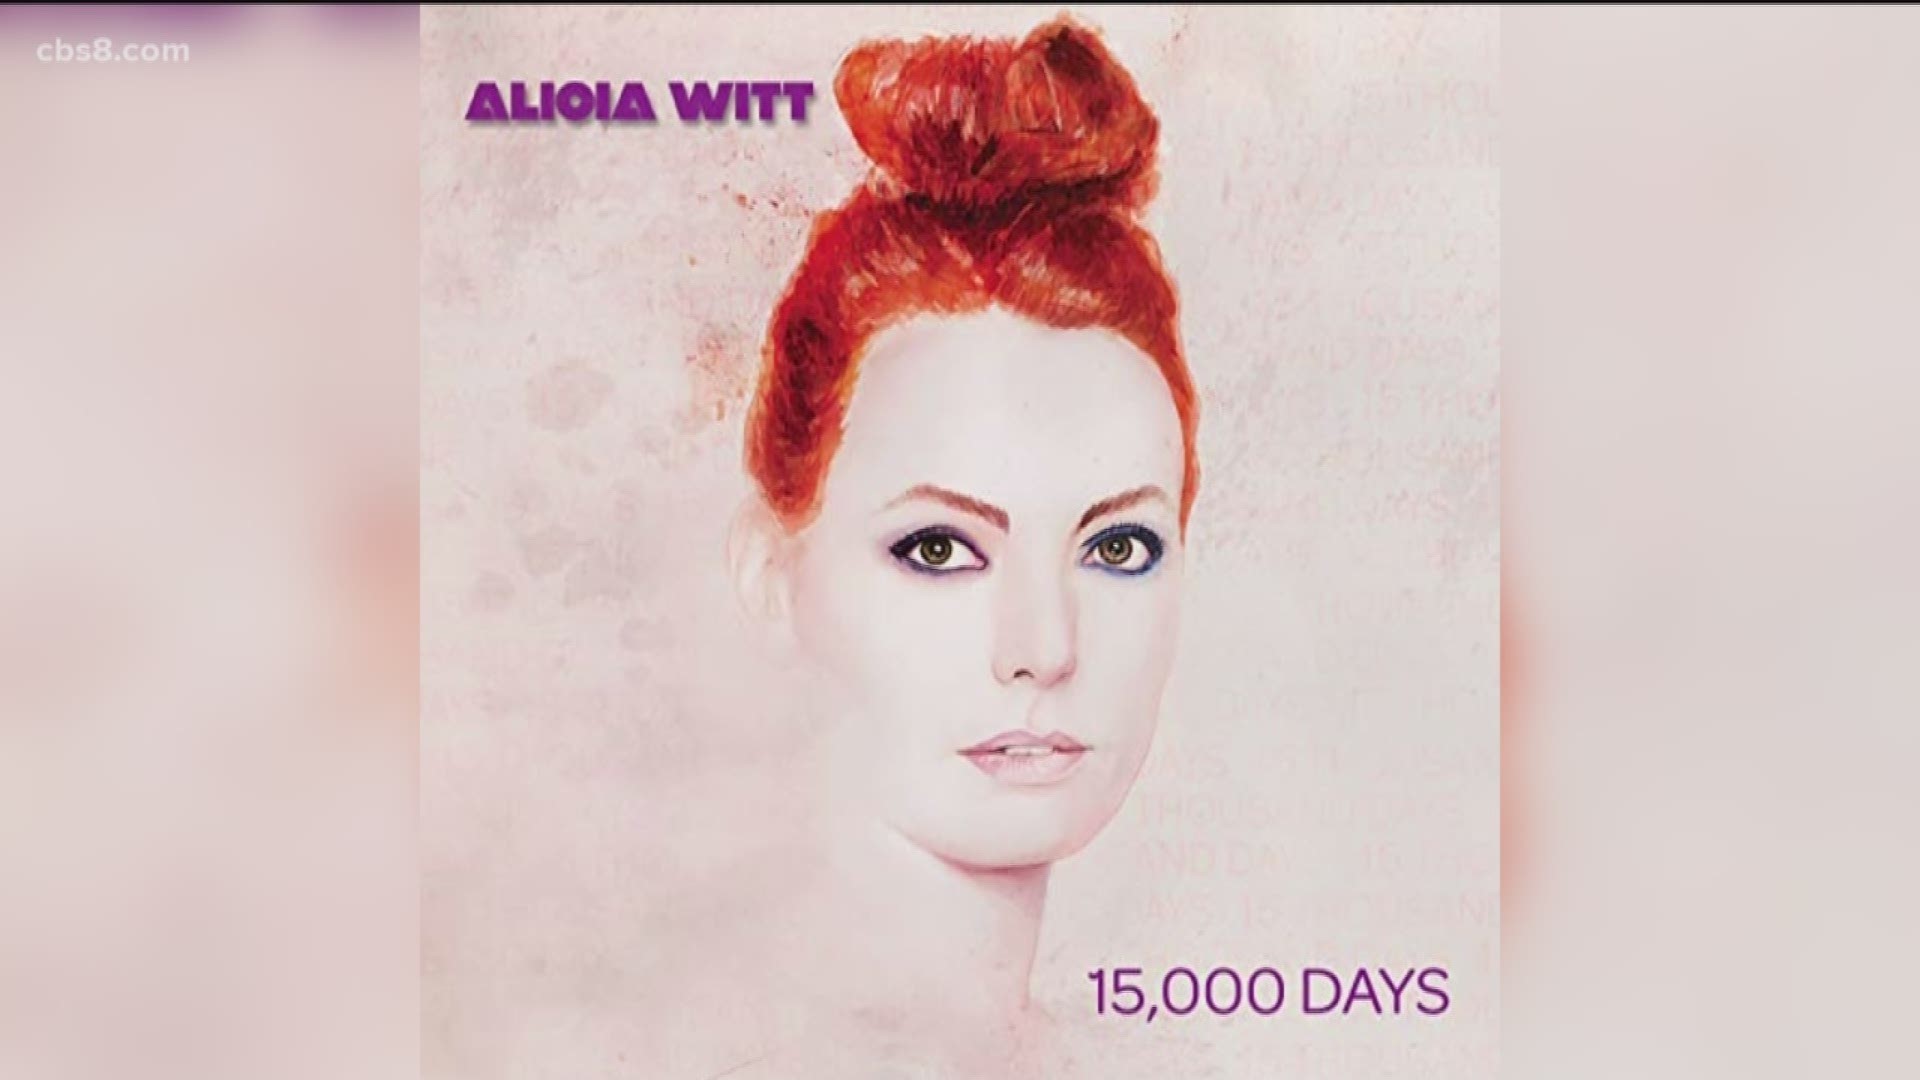 The singer, songwriter, pianist and actress will be performing songs off her fourth release "15,000 Days" featuring the single "Younger."